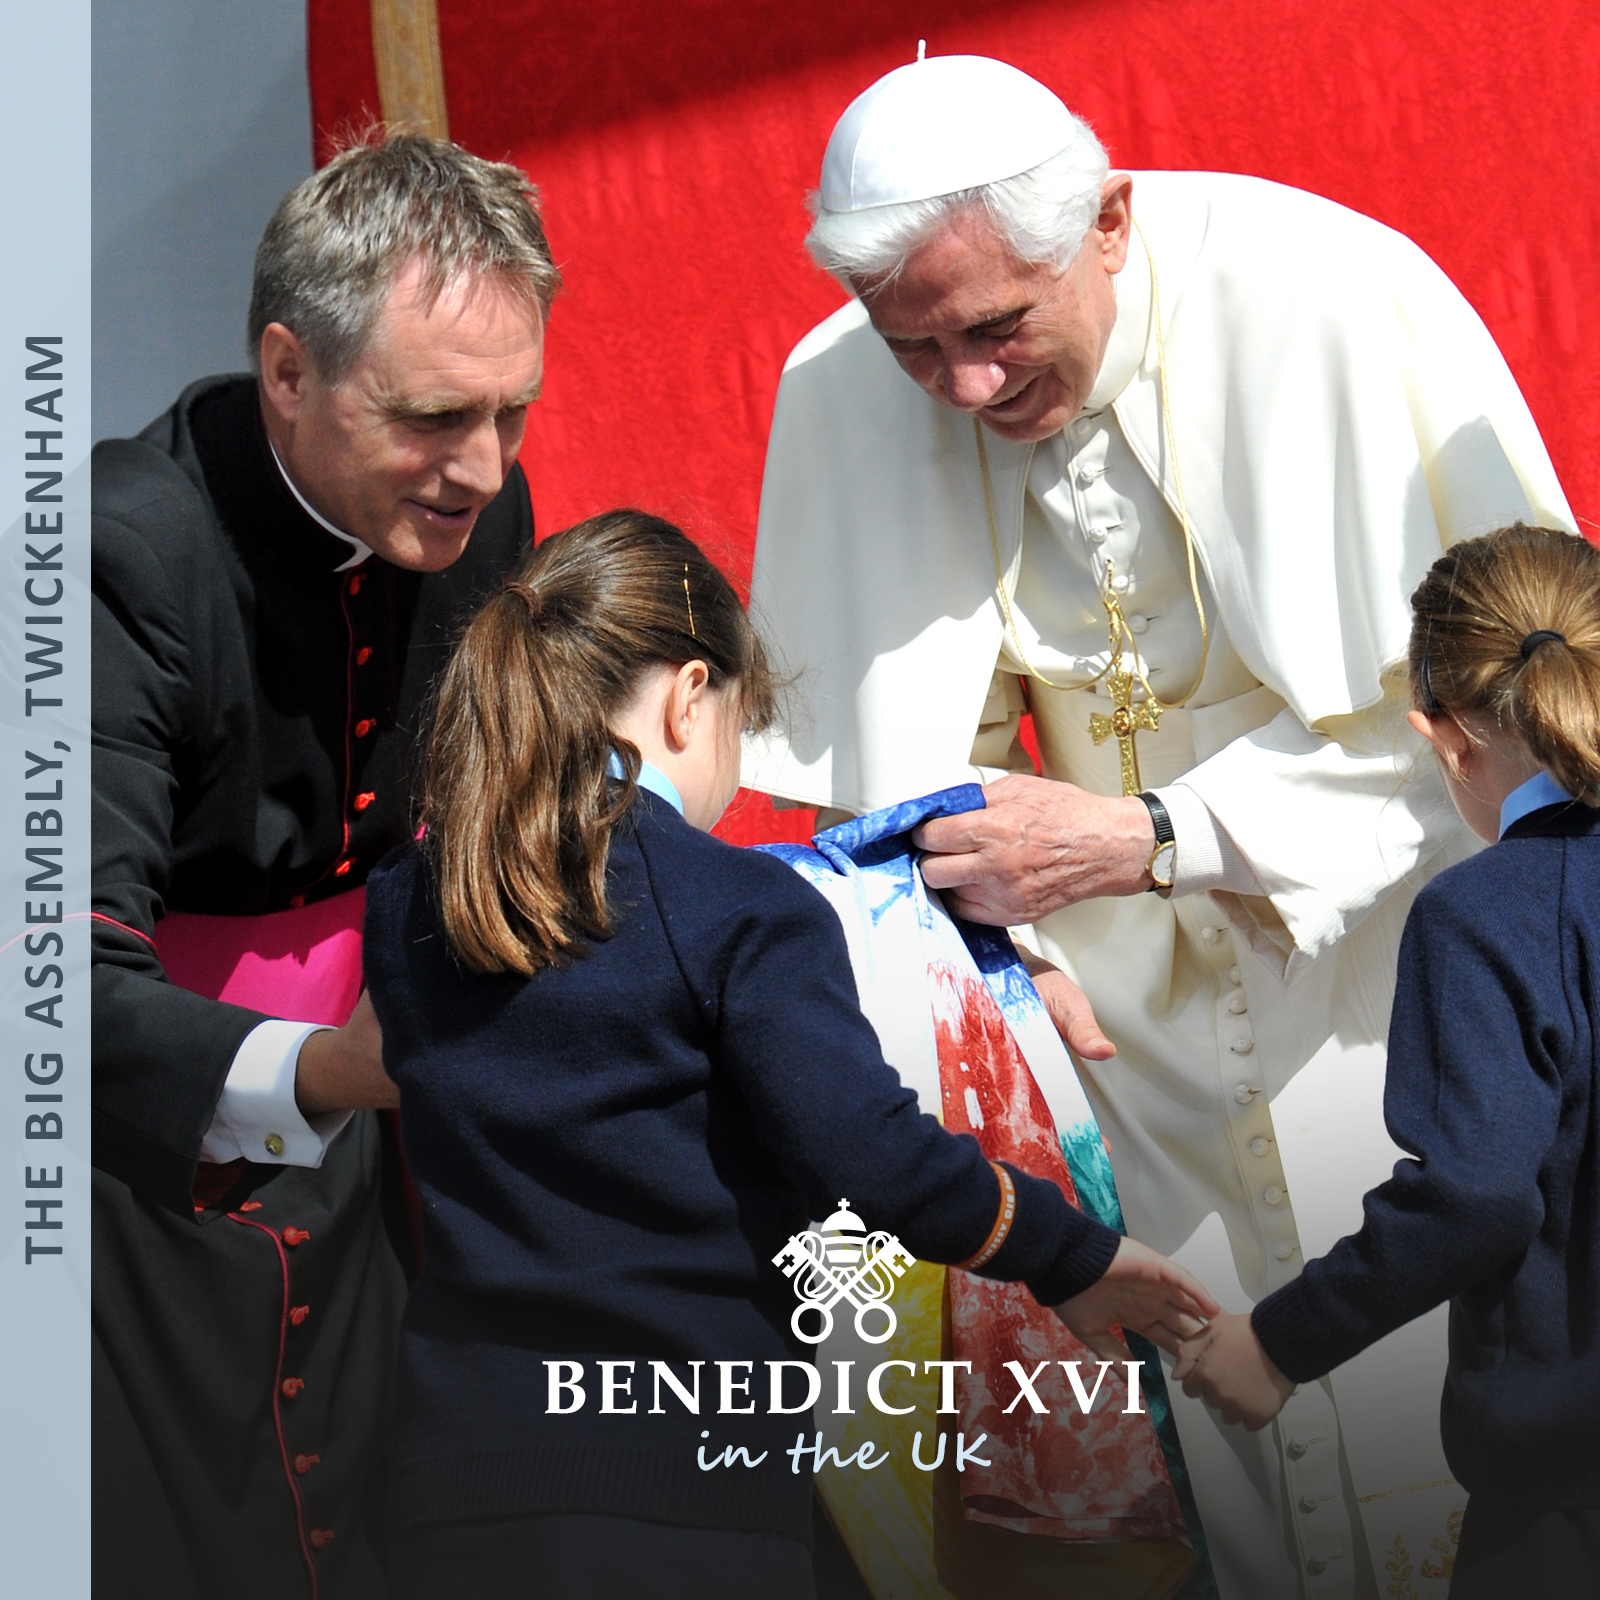 Pope Benedict XVI speaks to school pupils at the Big Assembly